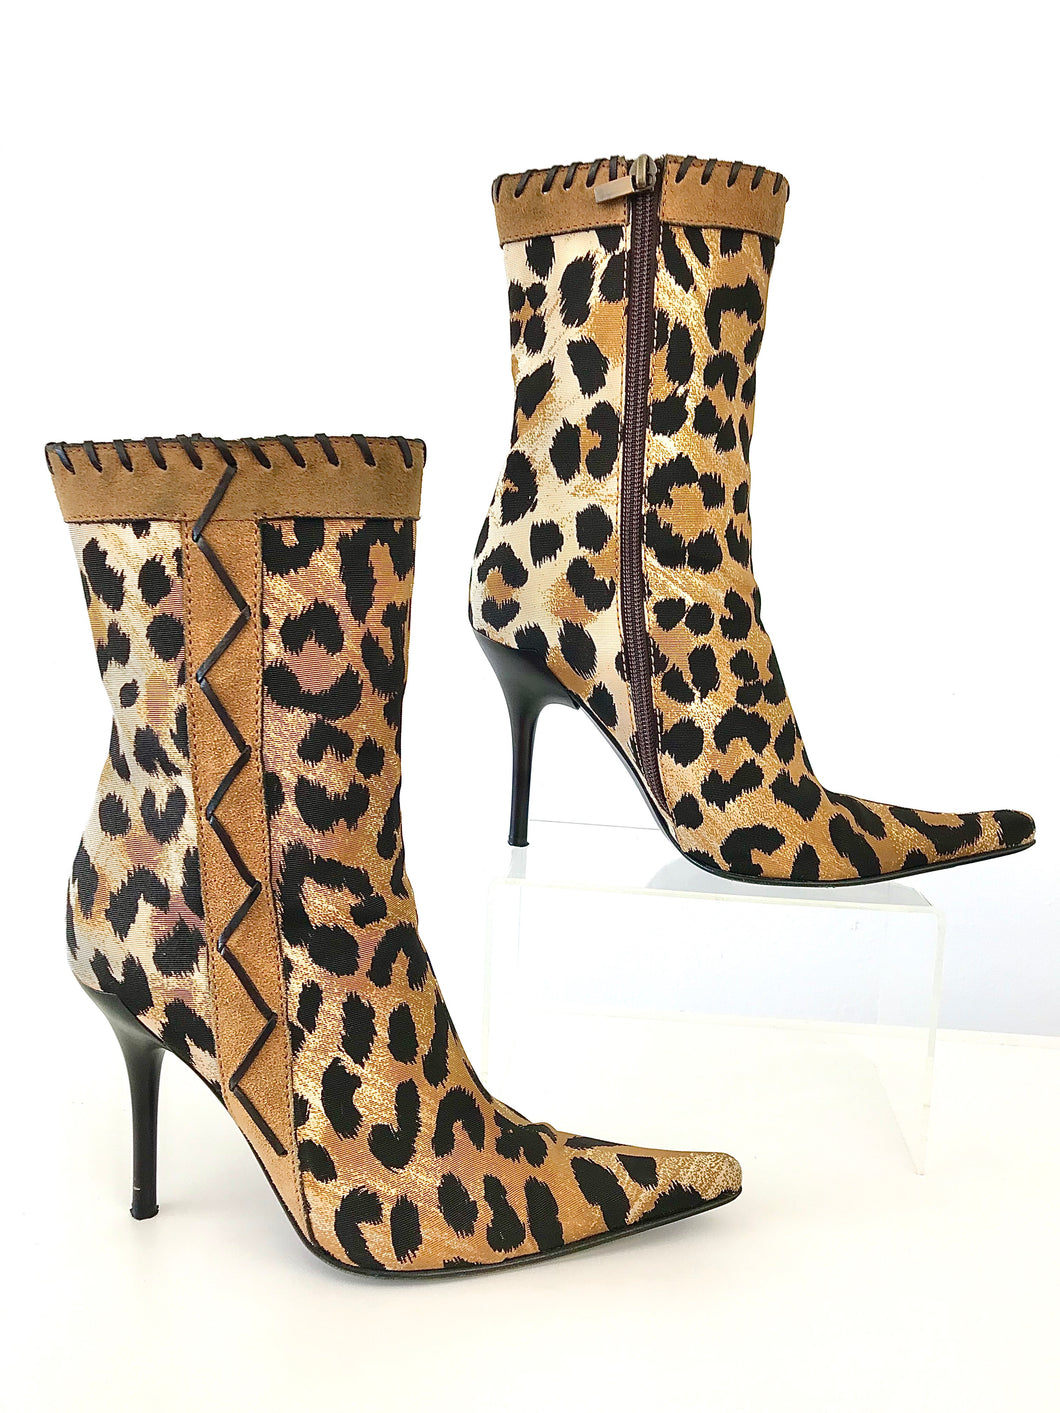 2000's Leopard Print Fabric Stiletto Ankle Boots by Casadei